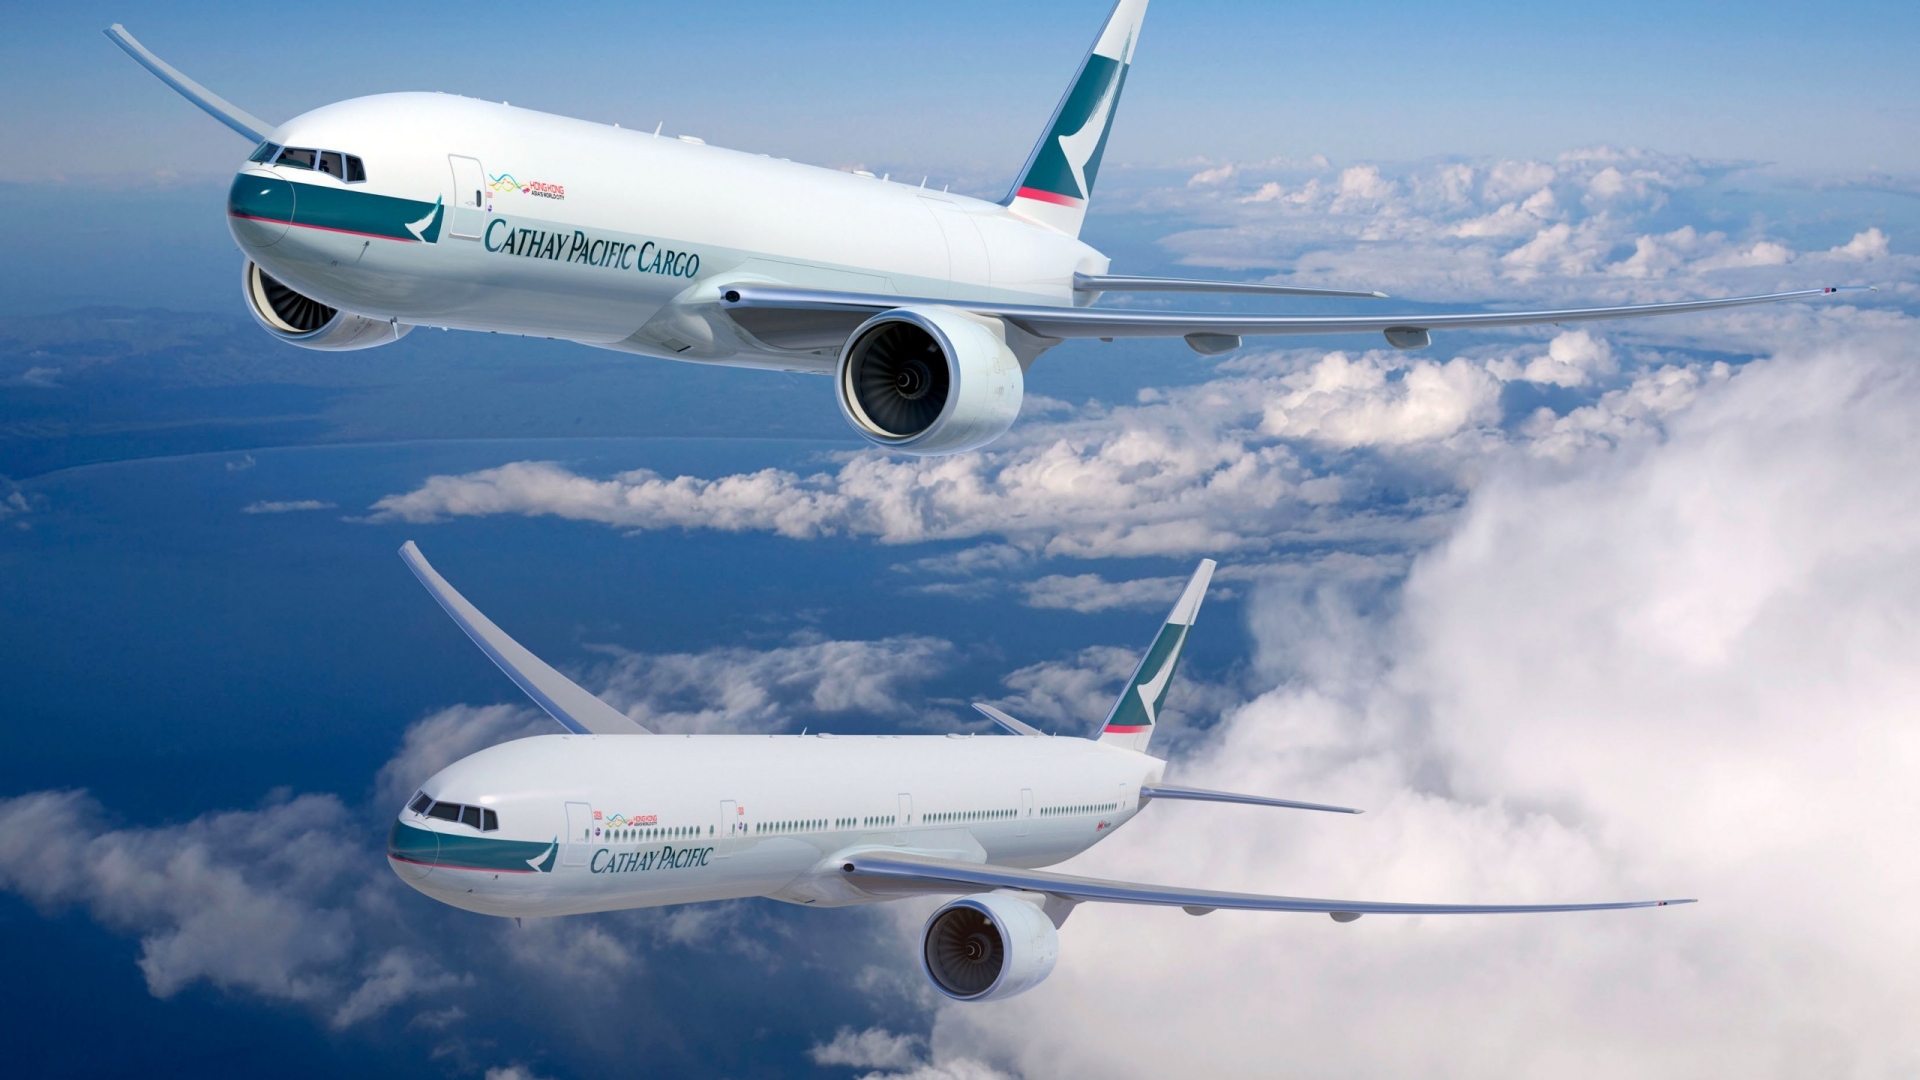 Cathay Pacific Boeing 777 for 1920 x 1080 HDTV 1080p resolution